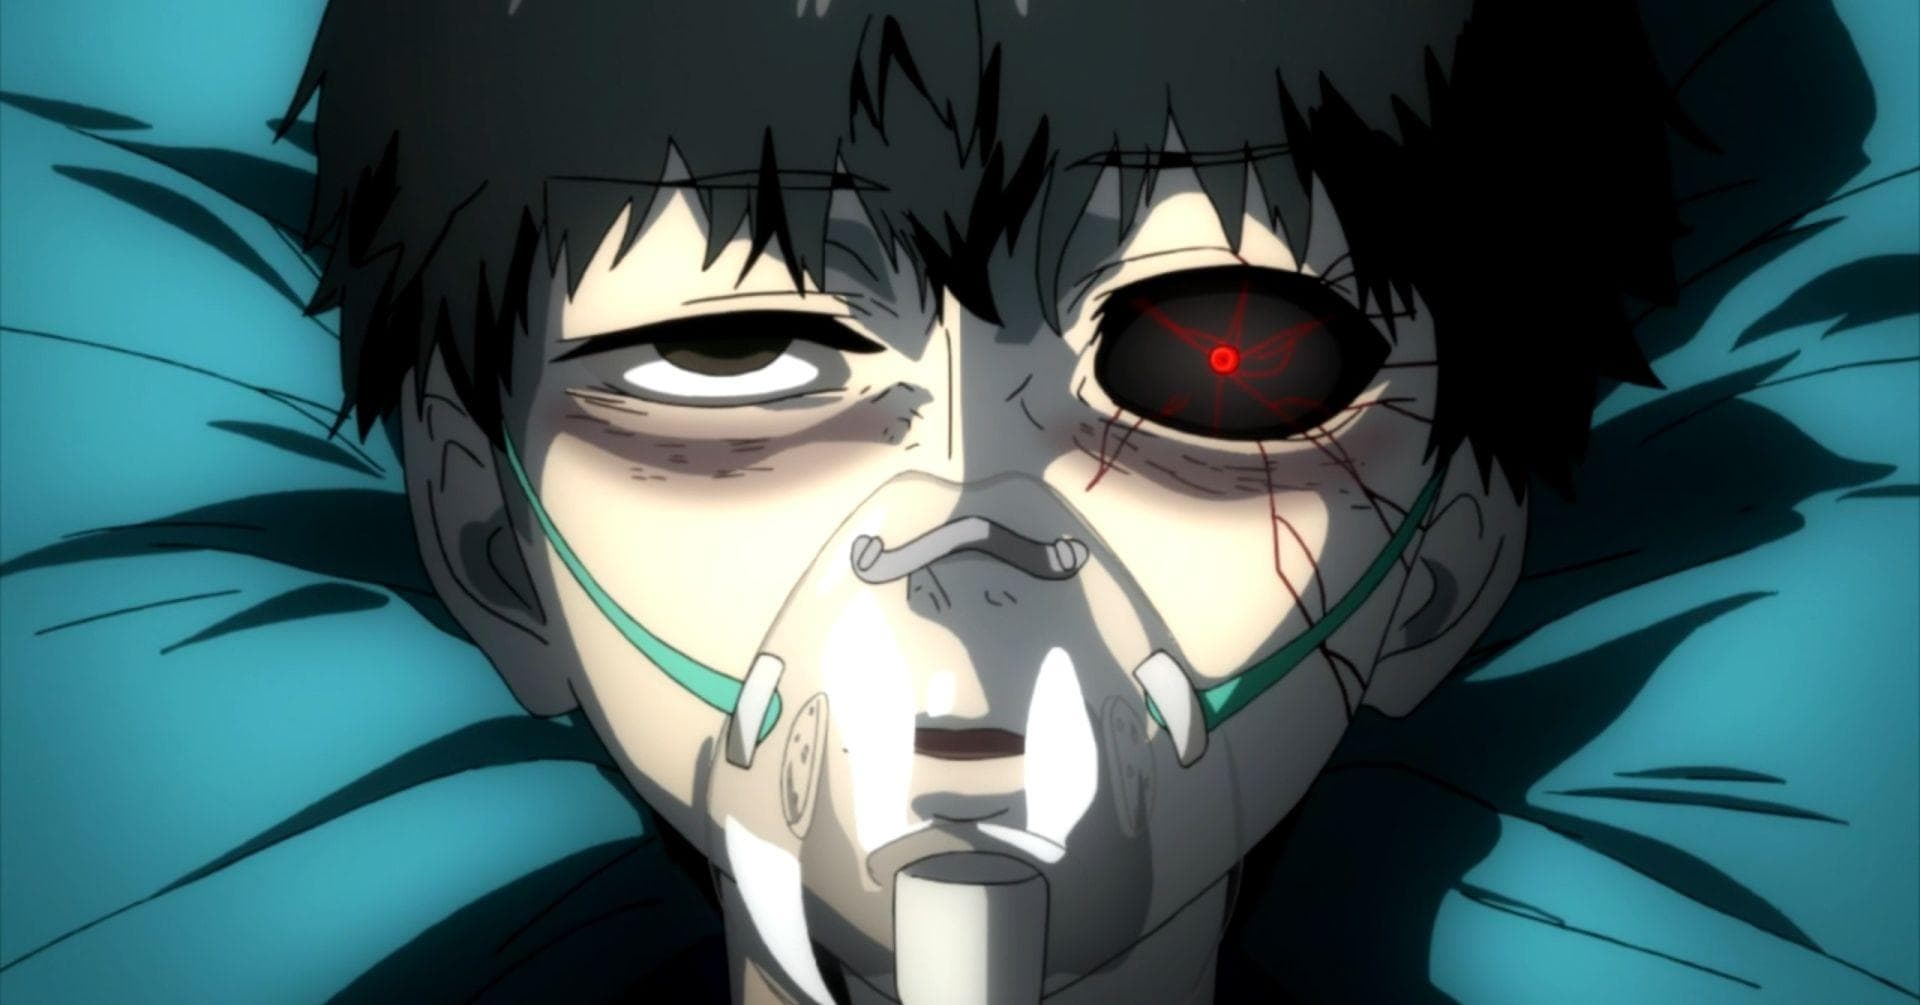 17 Anime Characters Who've Experienced Life-Altering Trauma